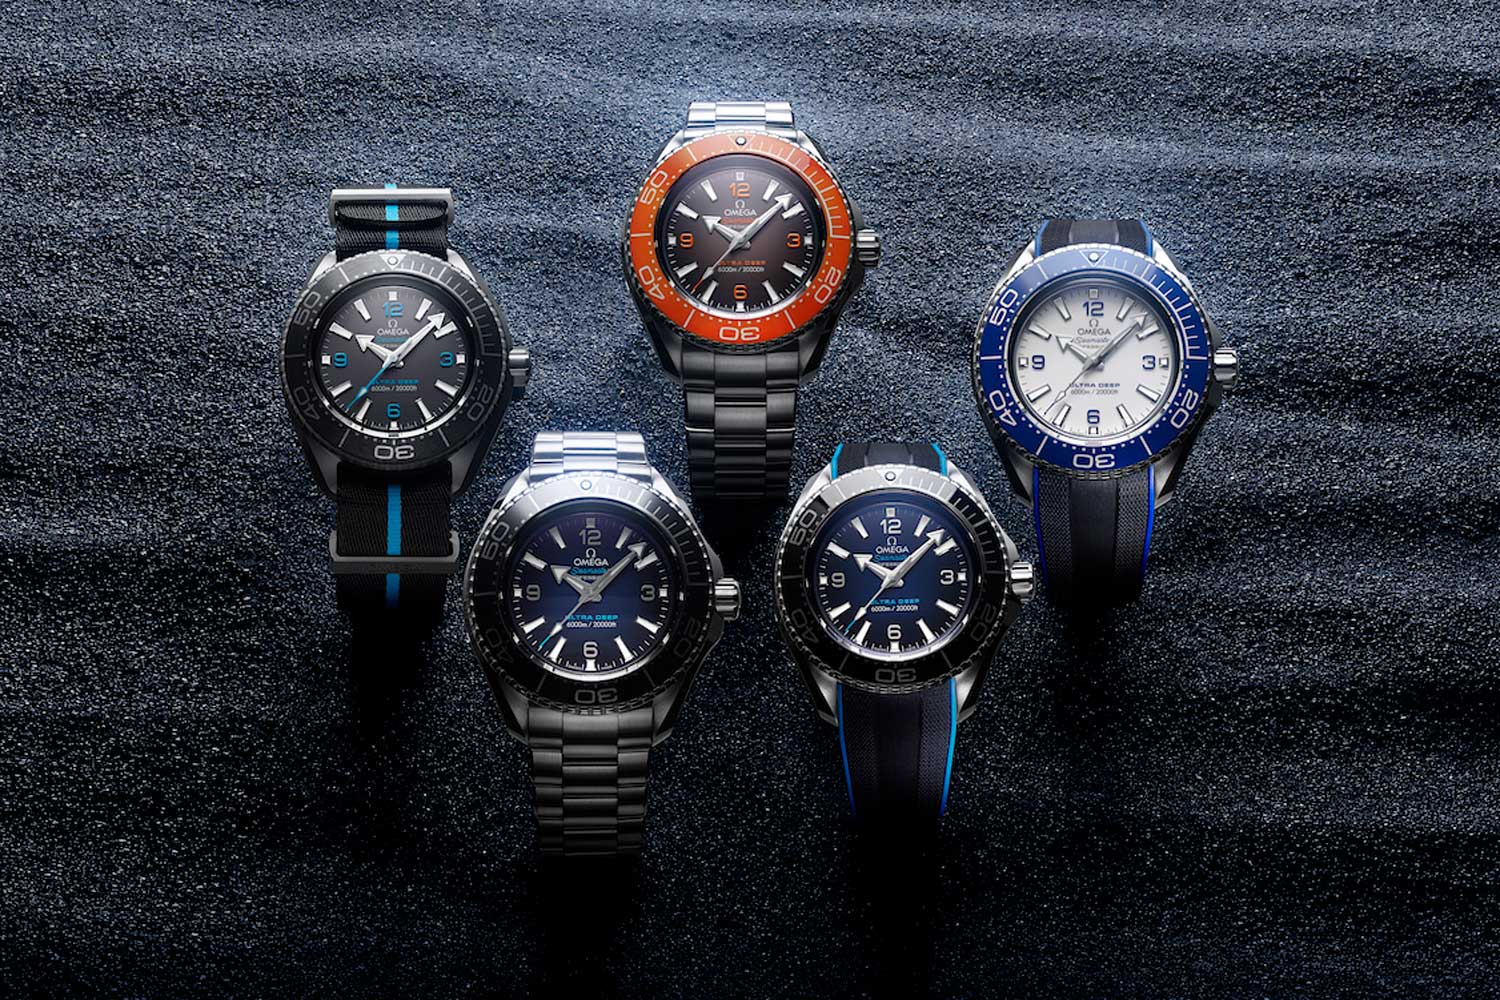 The Omega Seamaster Planet Ocean Ultra Deep comes in either Grade-5 titanium or a new stainless steel alloy - O-MEGASTEEL. Take your pick of dial and bezel colours, bracelet, NATO or rubber straps. (Image: Omega)